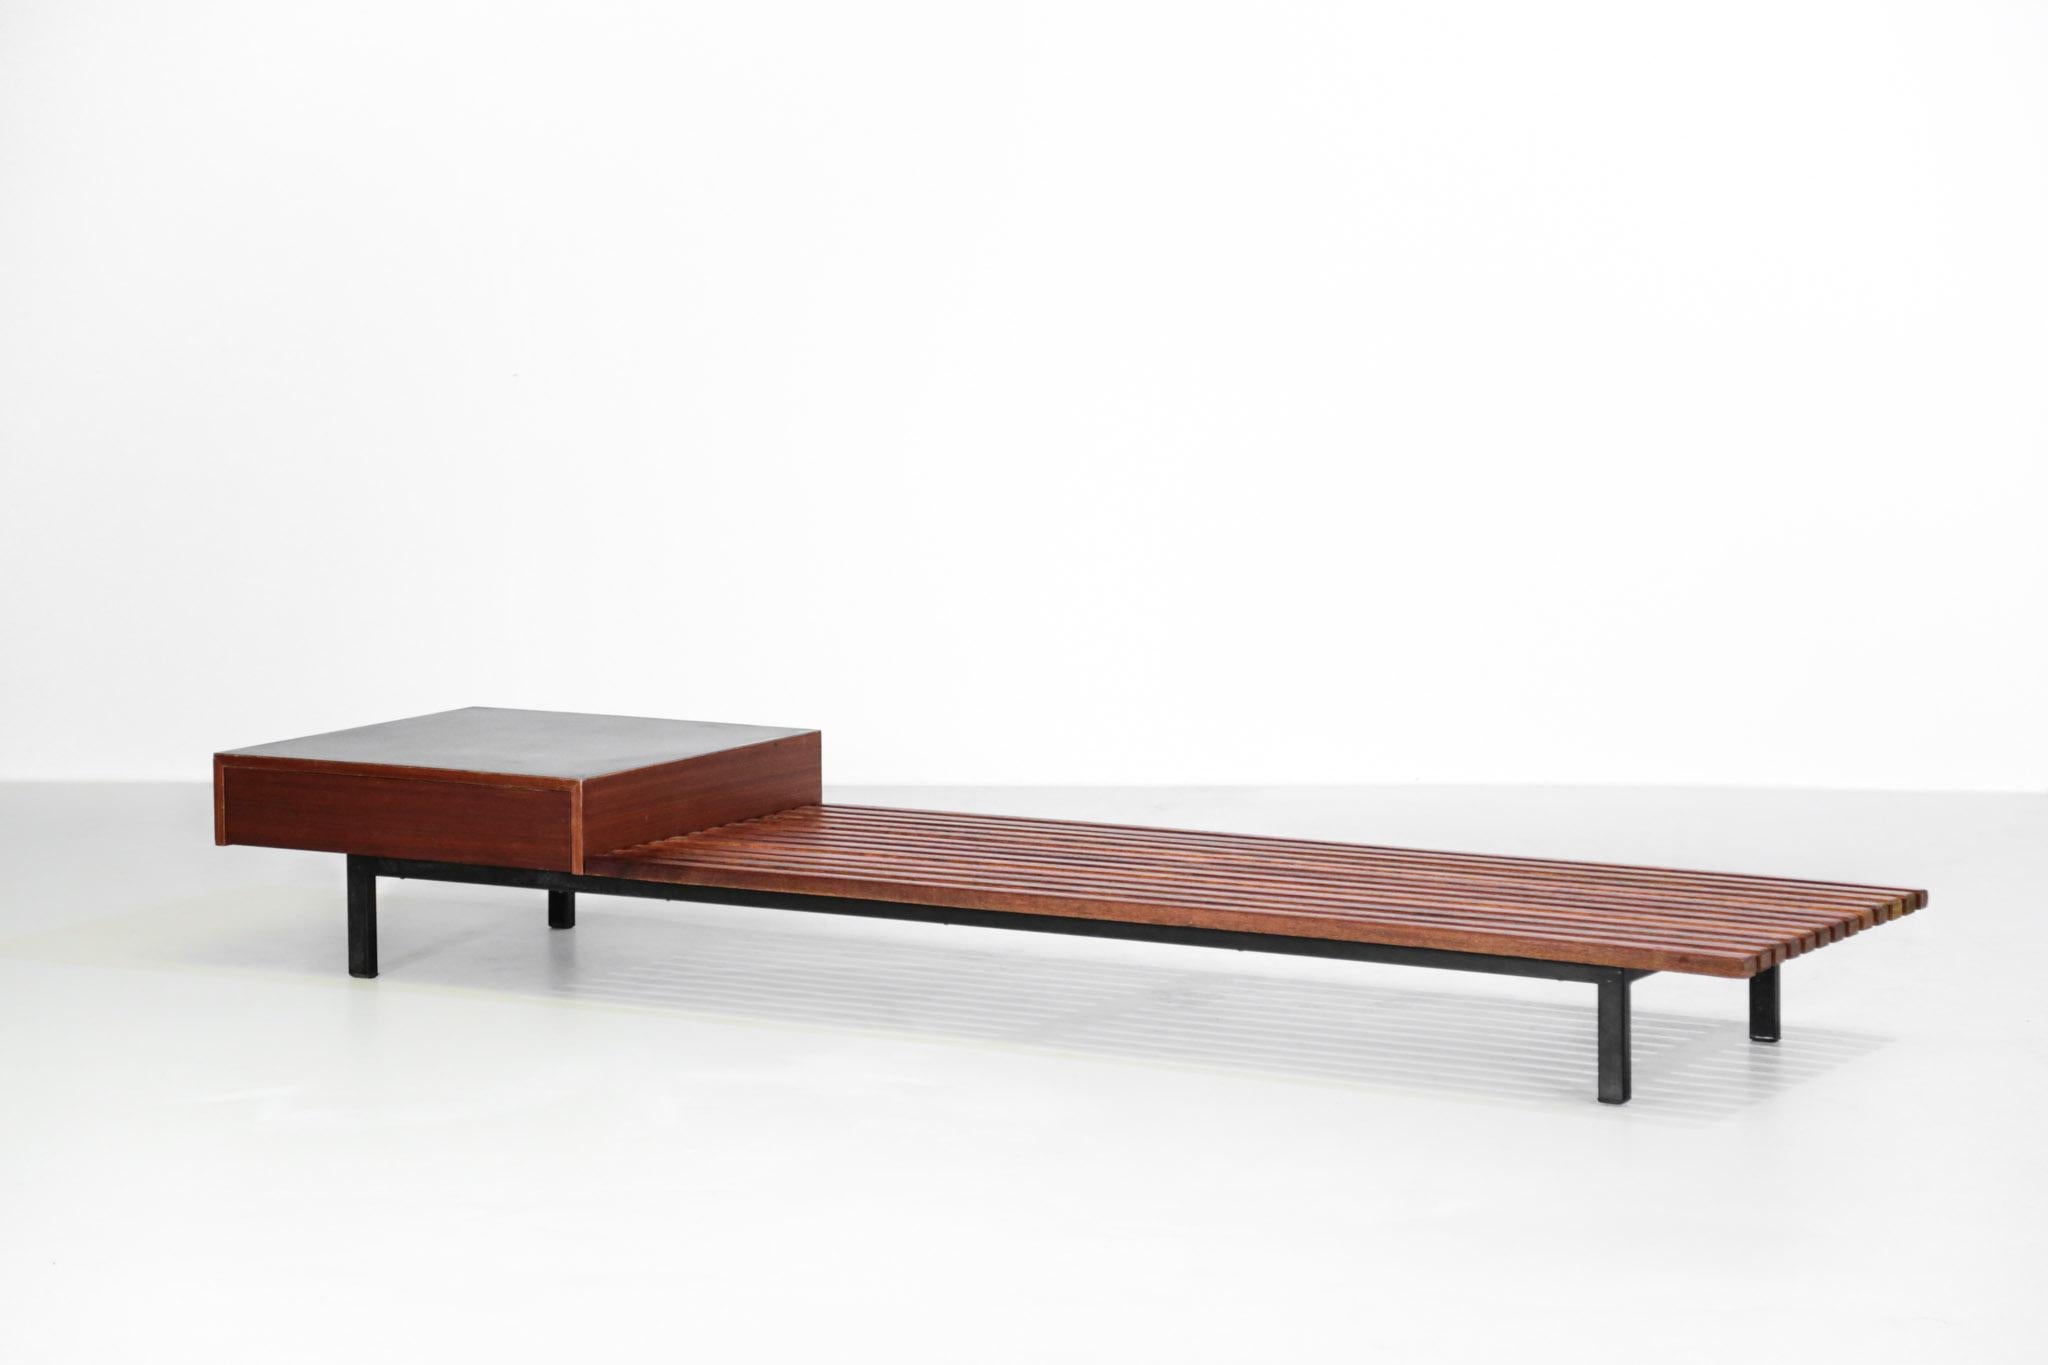 Rare bench with one drawer designed by Charlotte Perriand 
Drawer in mahogany wood and plastic laminated, frame in lacquered metal, top of oak.
 